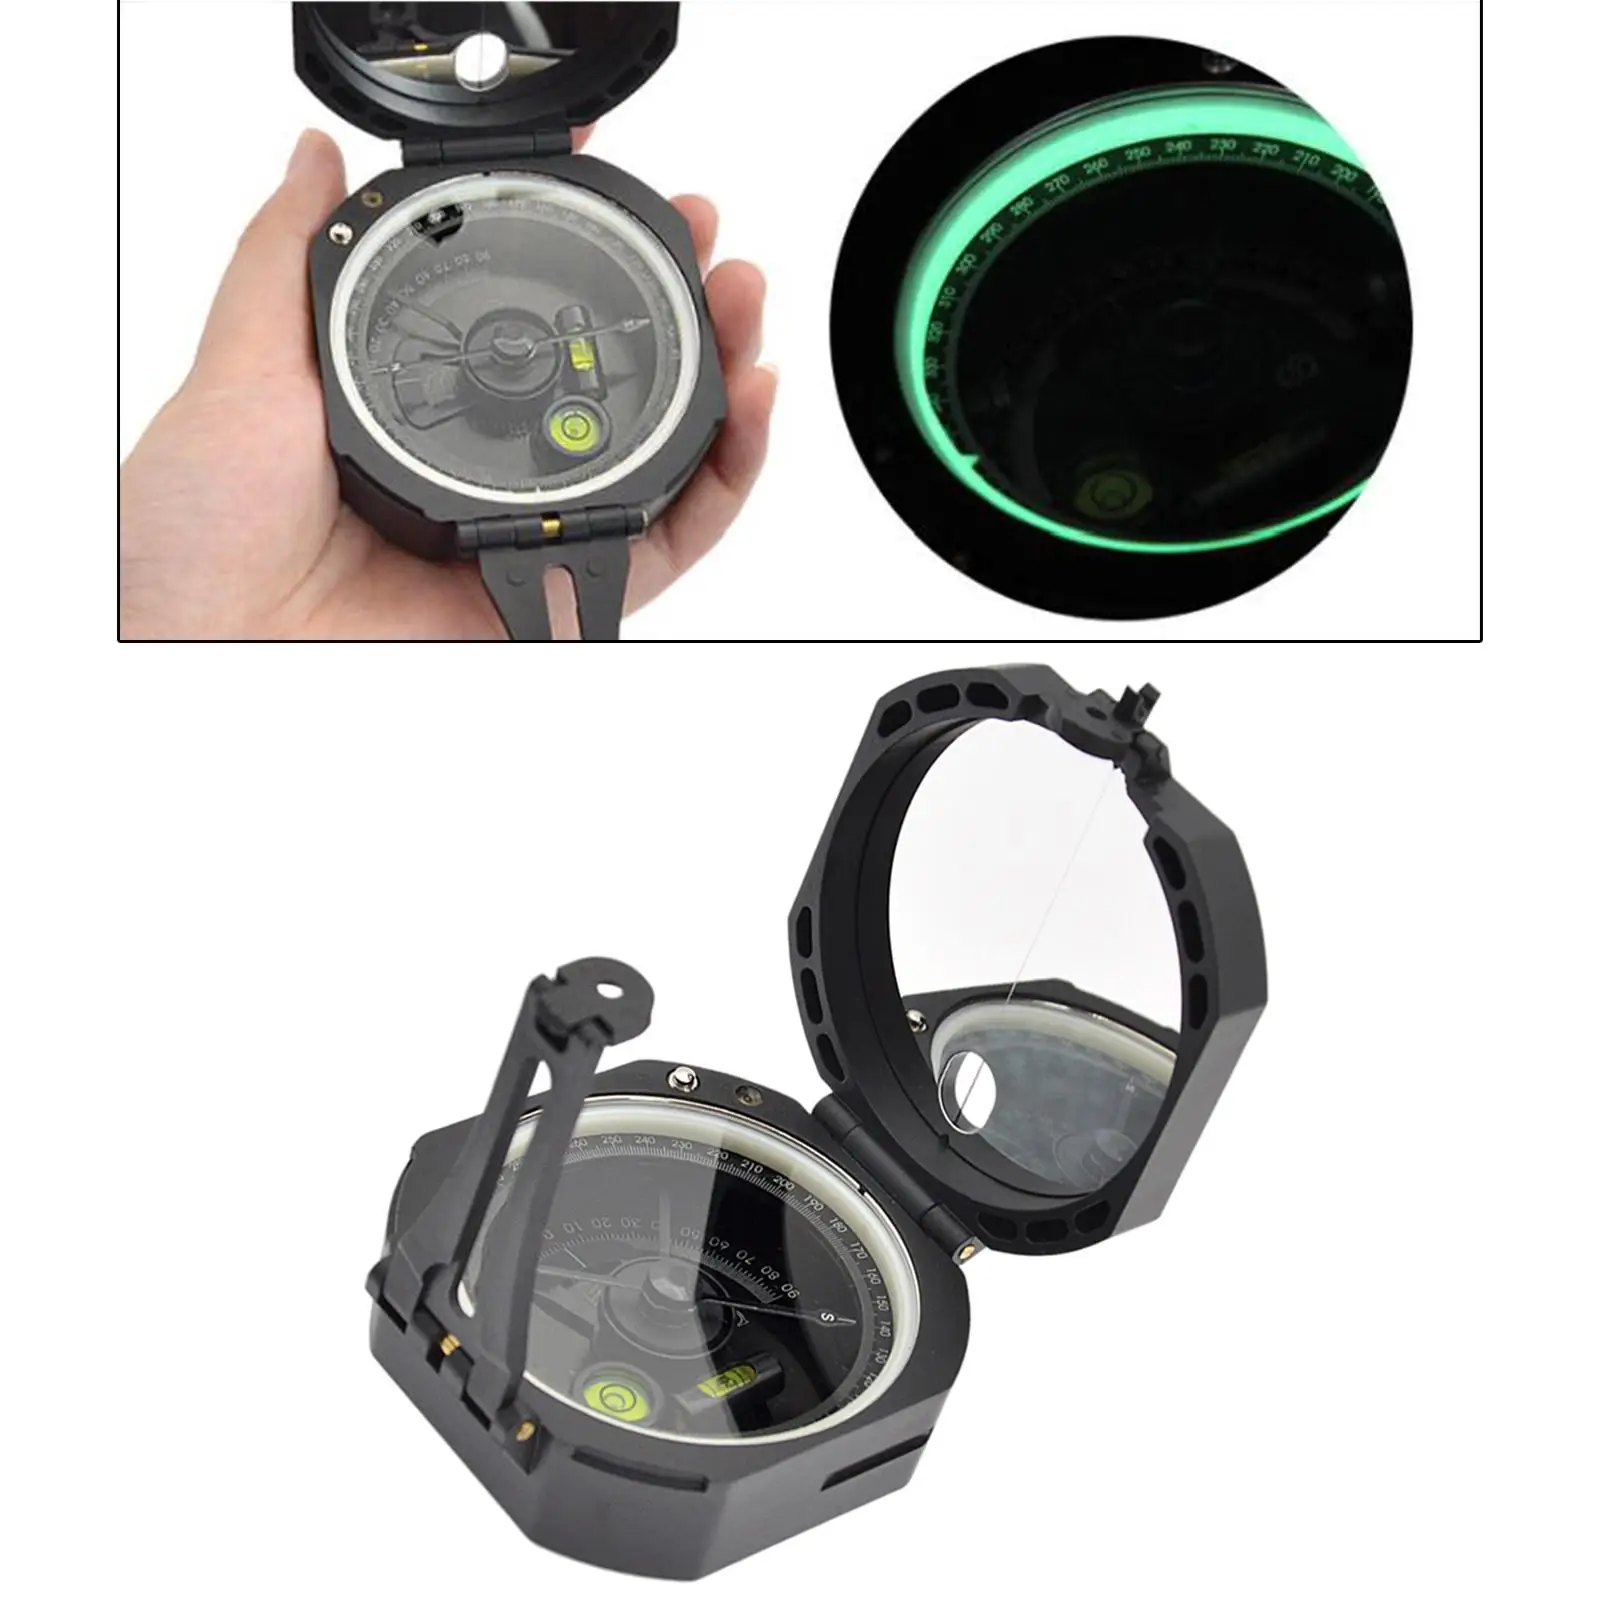 Multifunction Camping Compass Mirror with Carrying Bag Lightweight